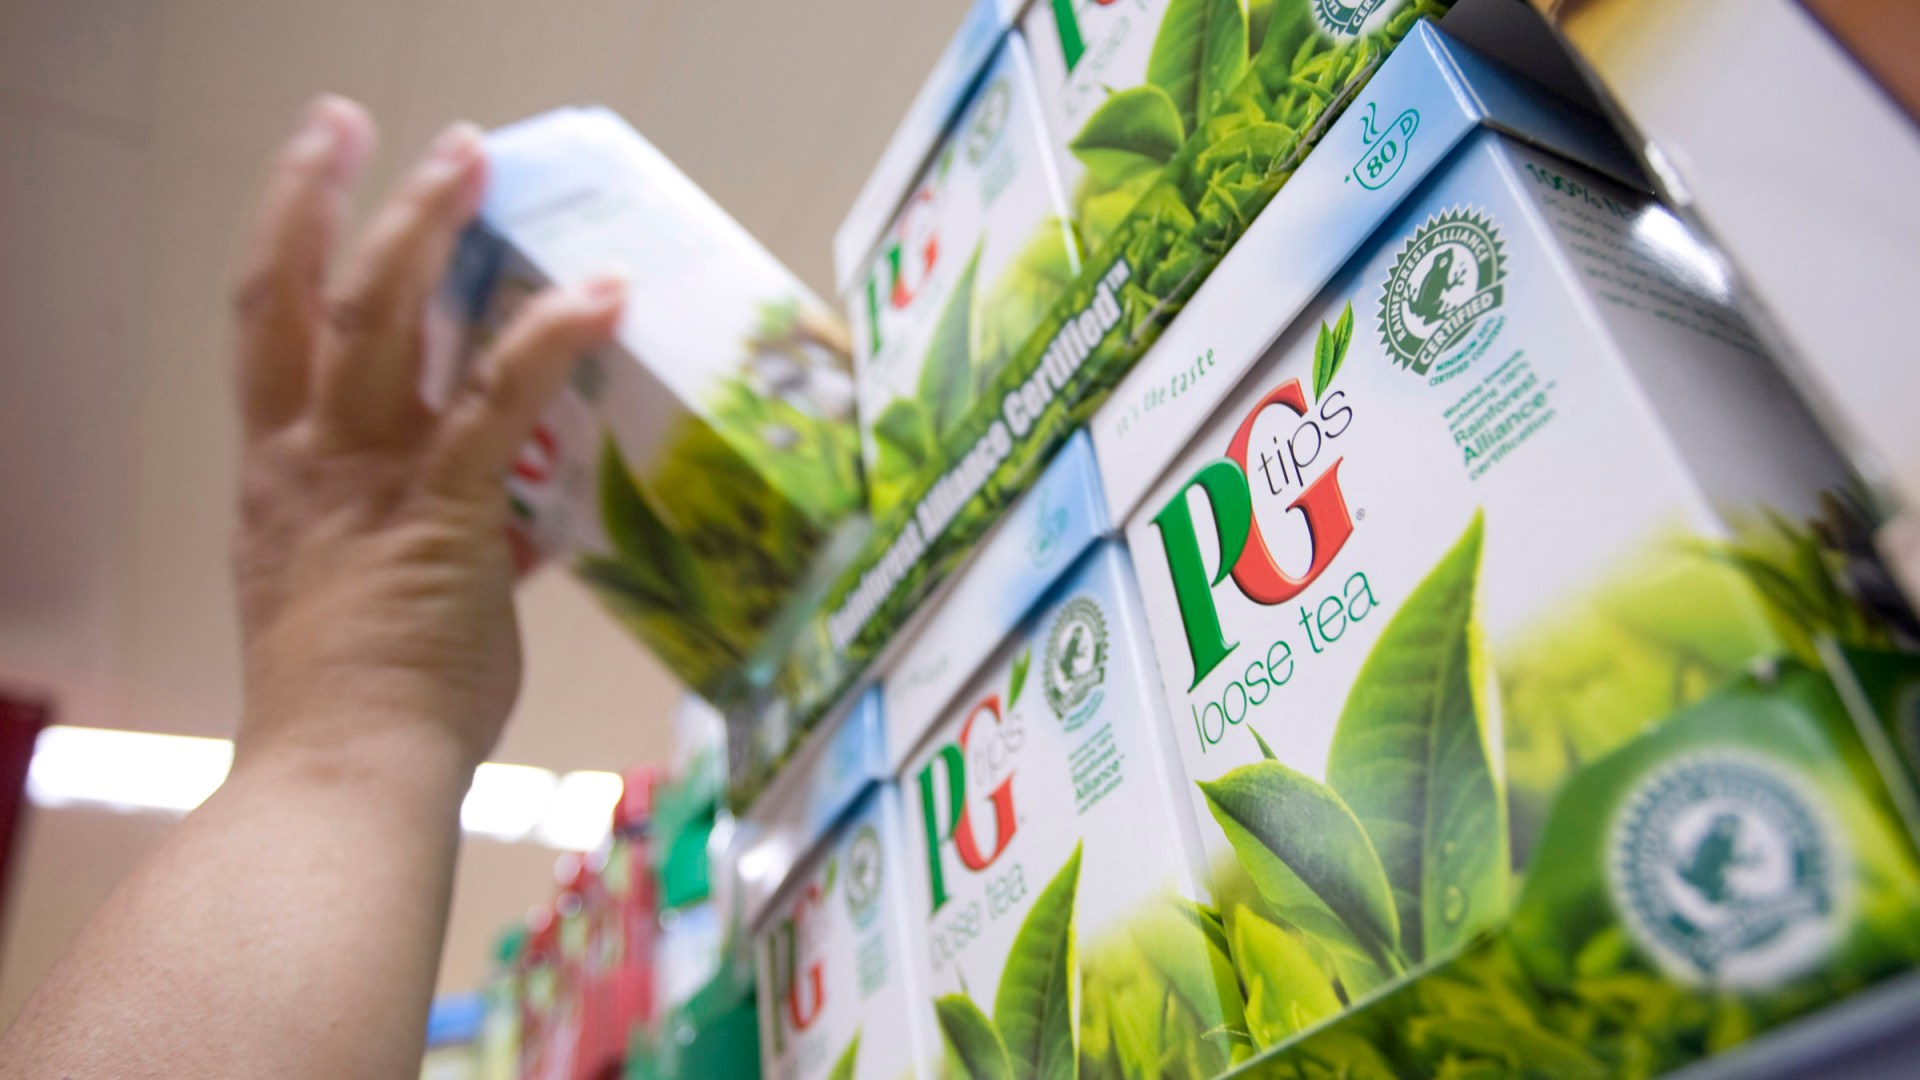 PG Tips forced to splash out £50m developing new tea bag because we’ve been brewing our cuppas all wrong